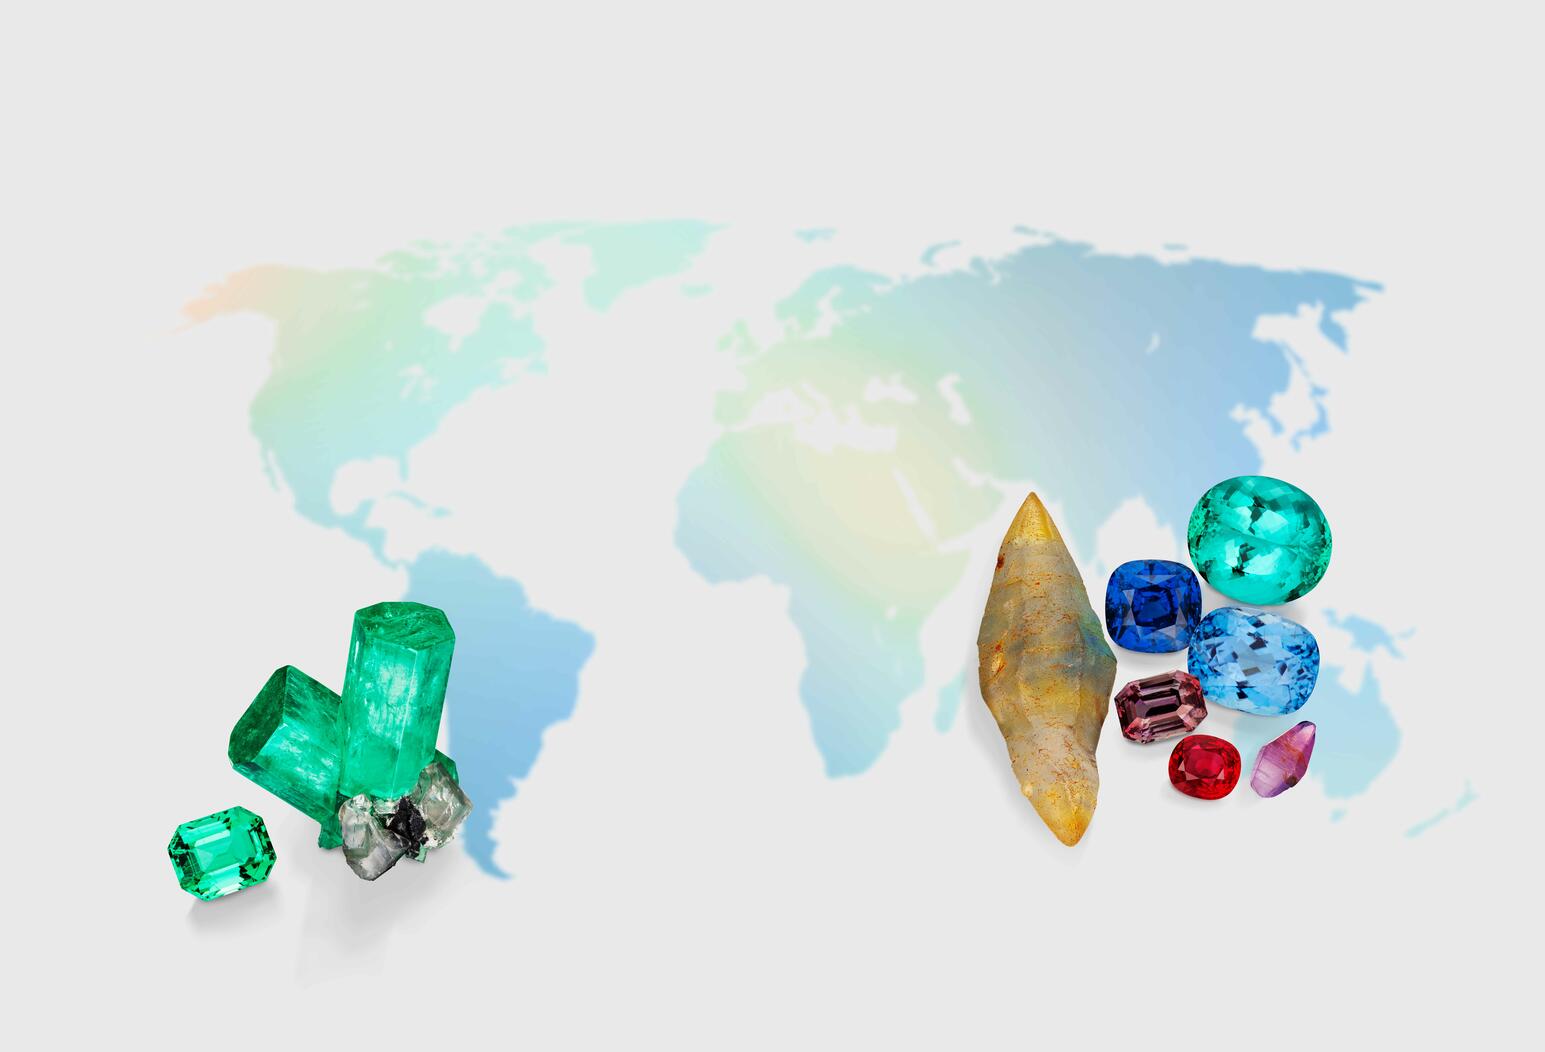 Finding gems: How De Beers uses insight, Feature